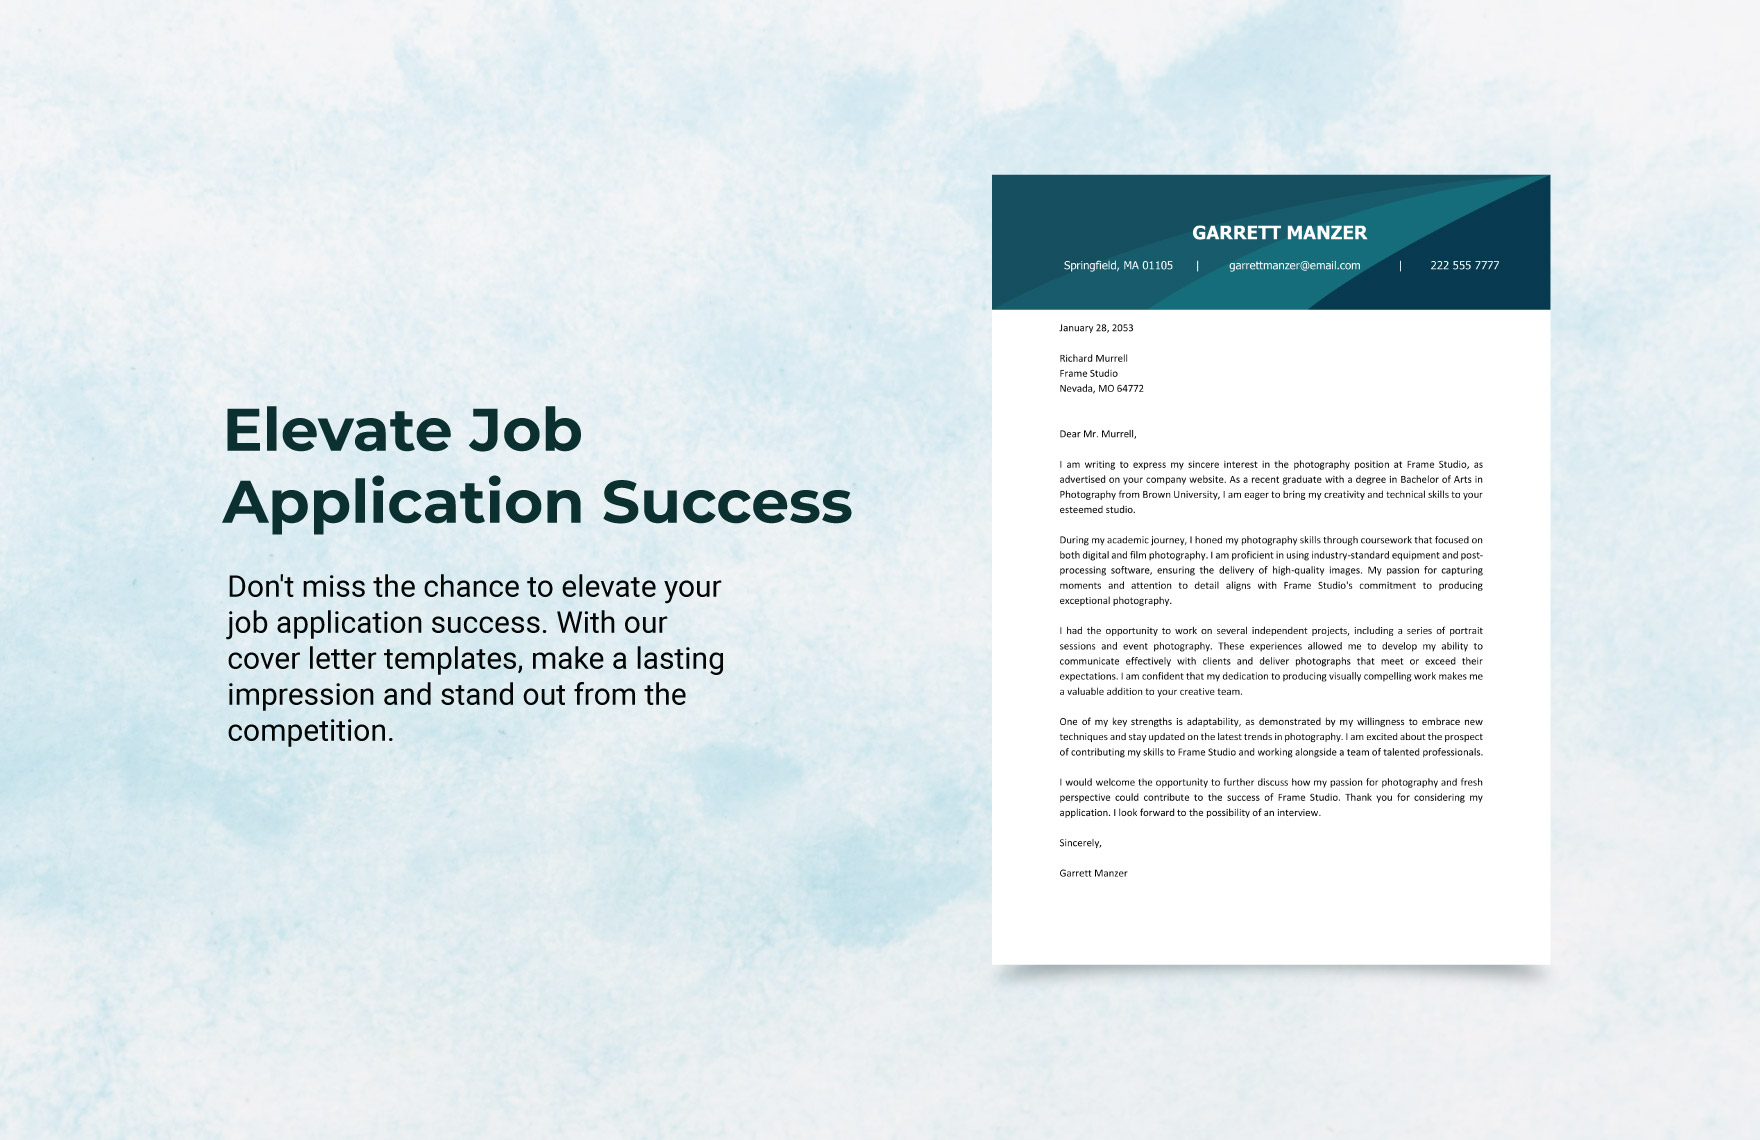 Freshers Cover Letter Template